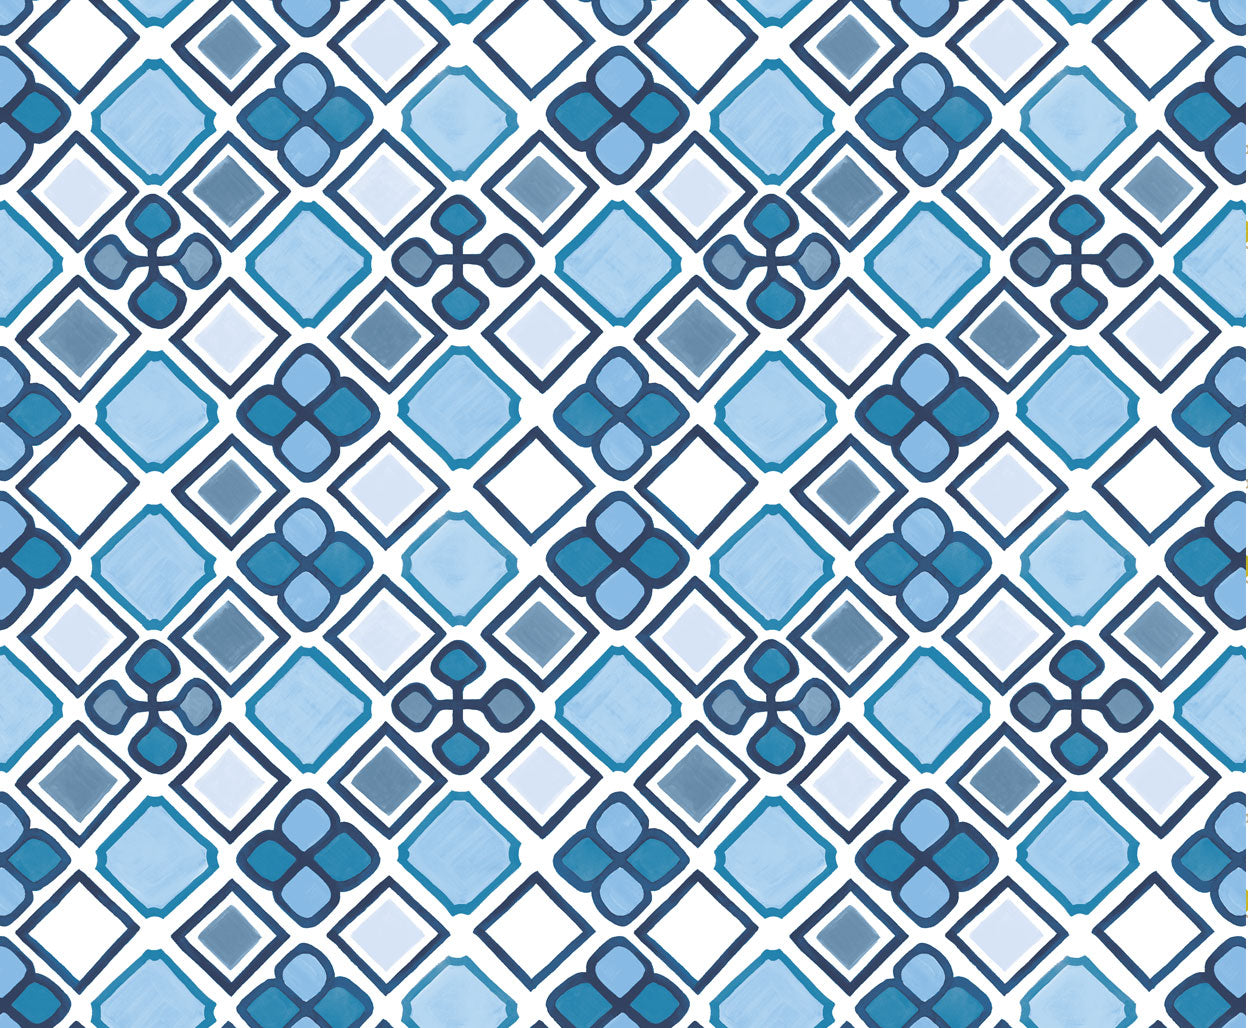 Detail of wallpaper in a geometric diamond and floral print in shades of blue, navy and white.